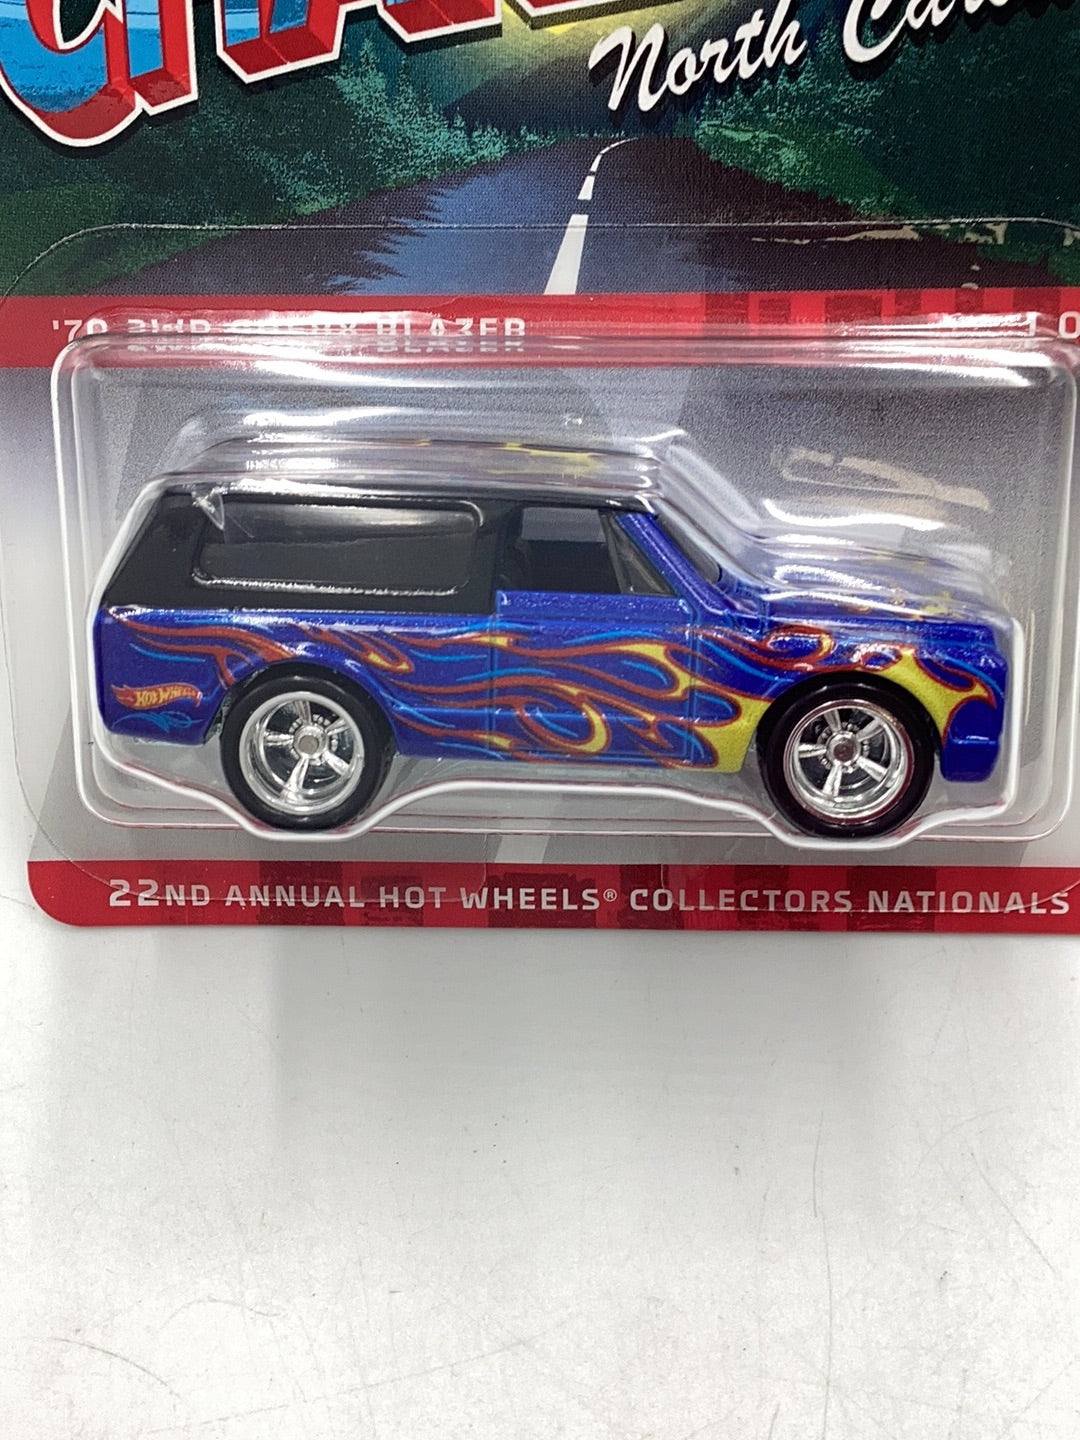 Hot wheels 22nd annual collectors Nationals 70 Chevy Blazer #797/6200 with protector